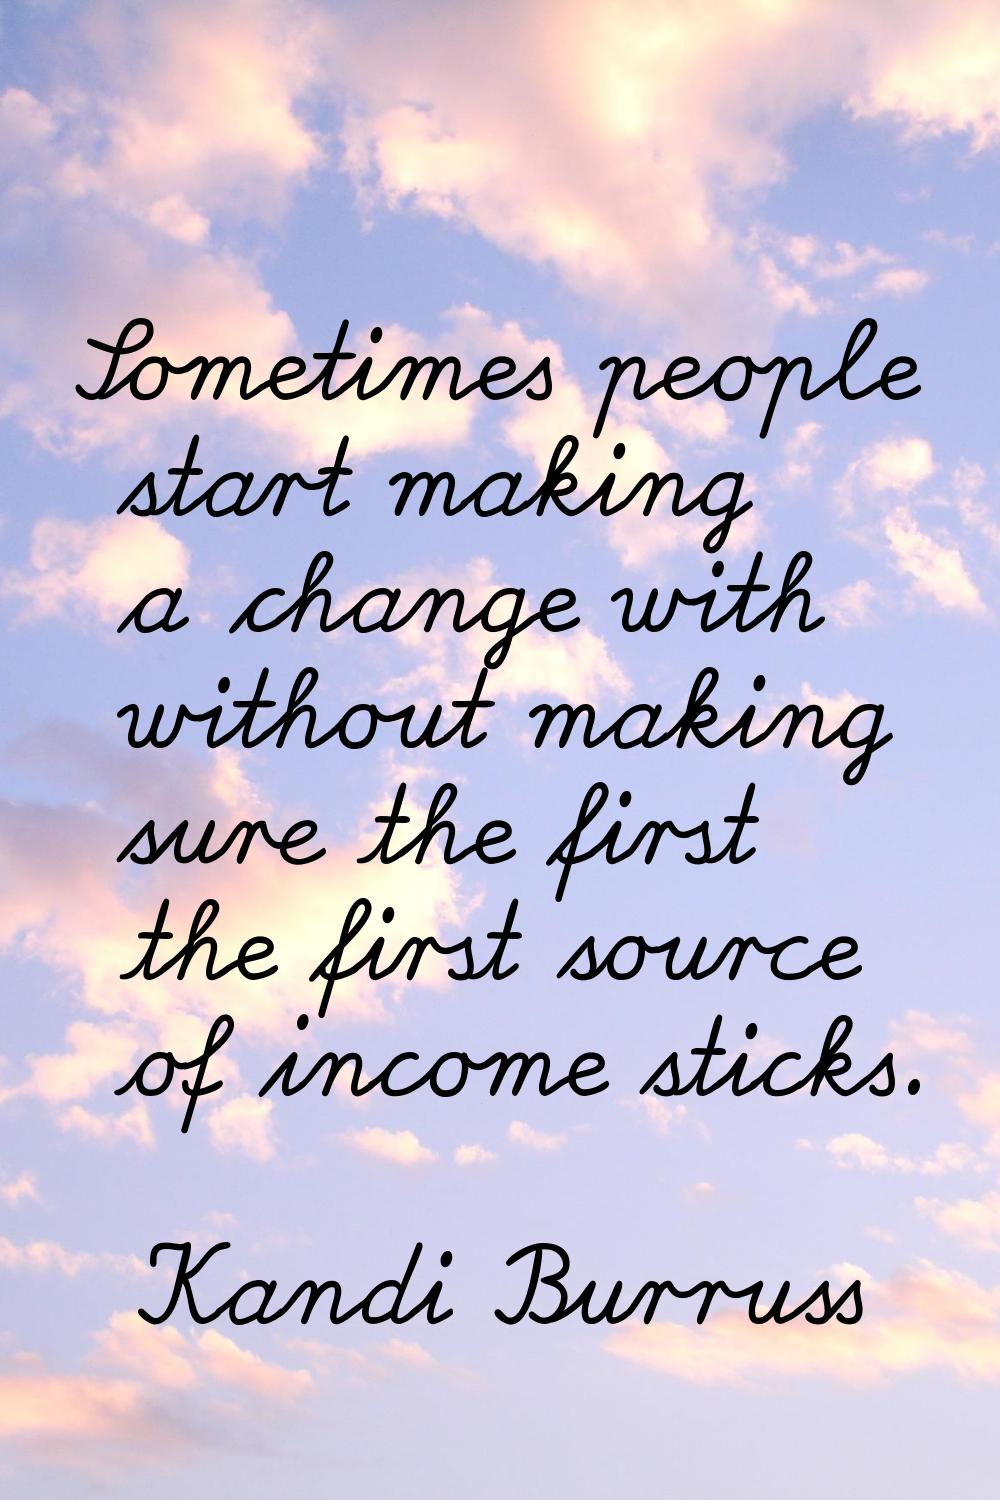 Sometimes people start making a change with without making sure the first the first source of incom